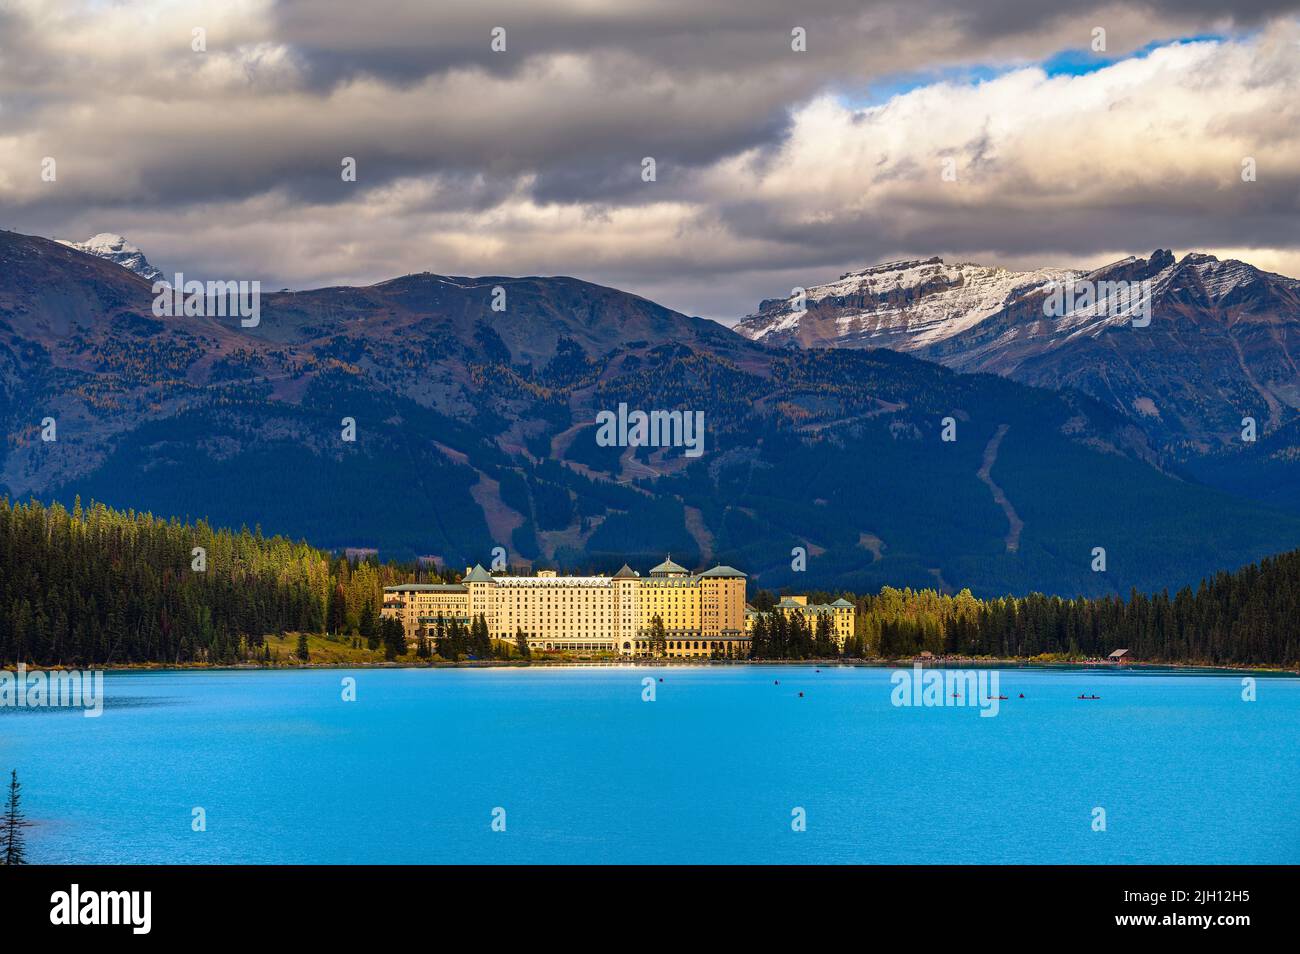 Lake Louise and Fairmont Chateau Hotel in Banff National Park, Alberta, Canada Stock Photo